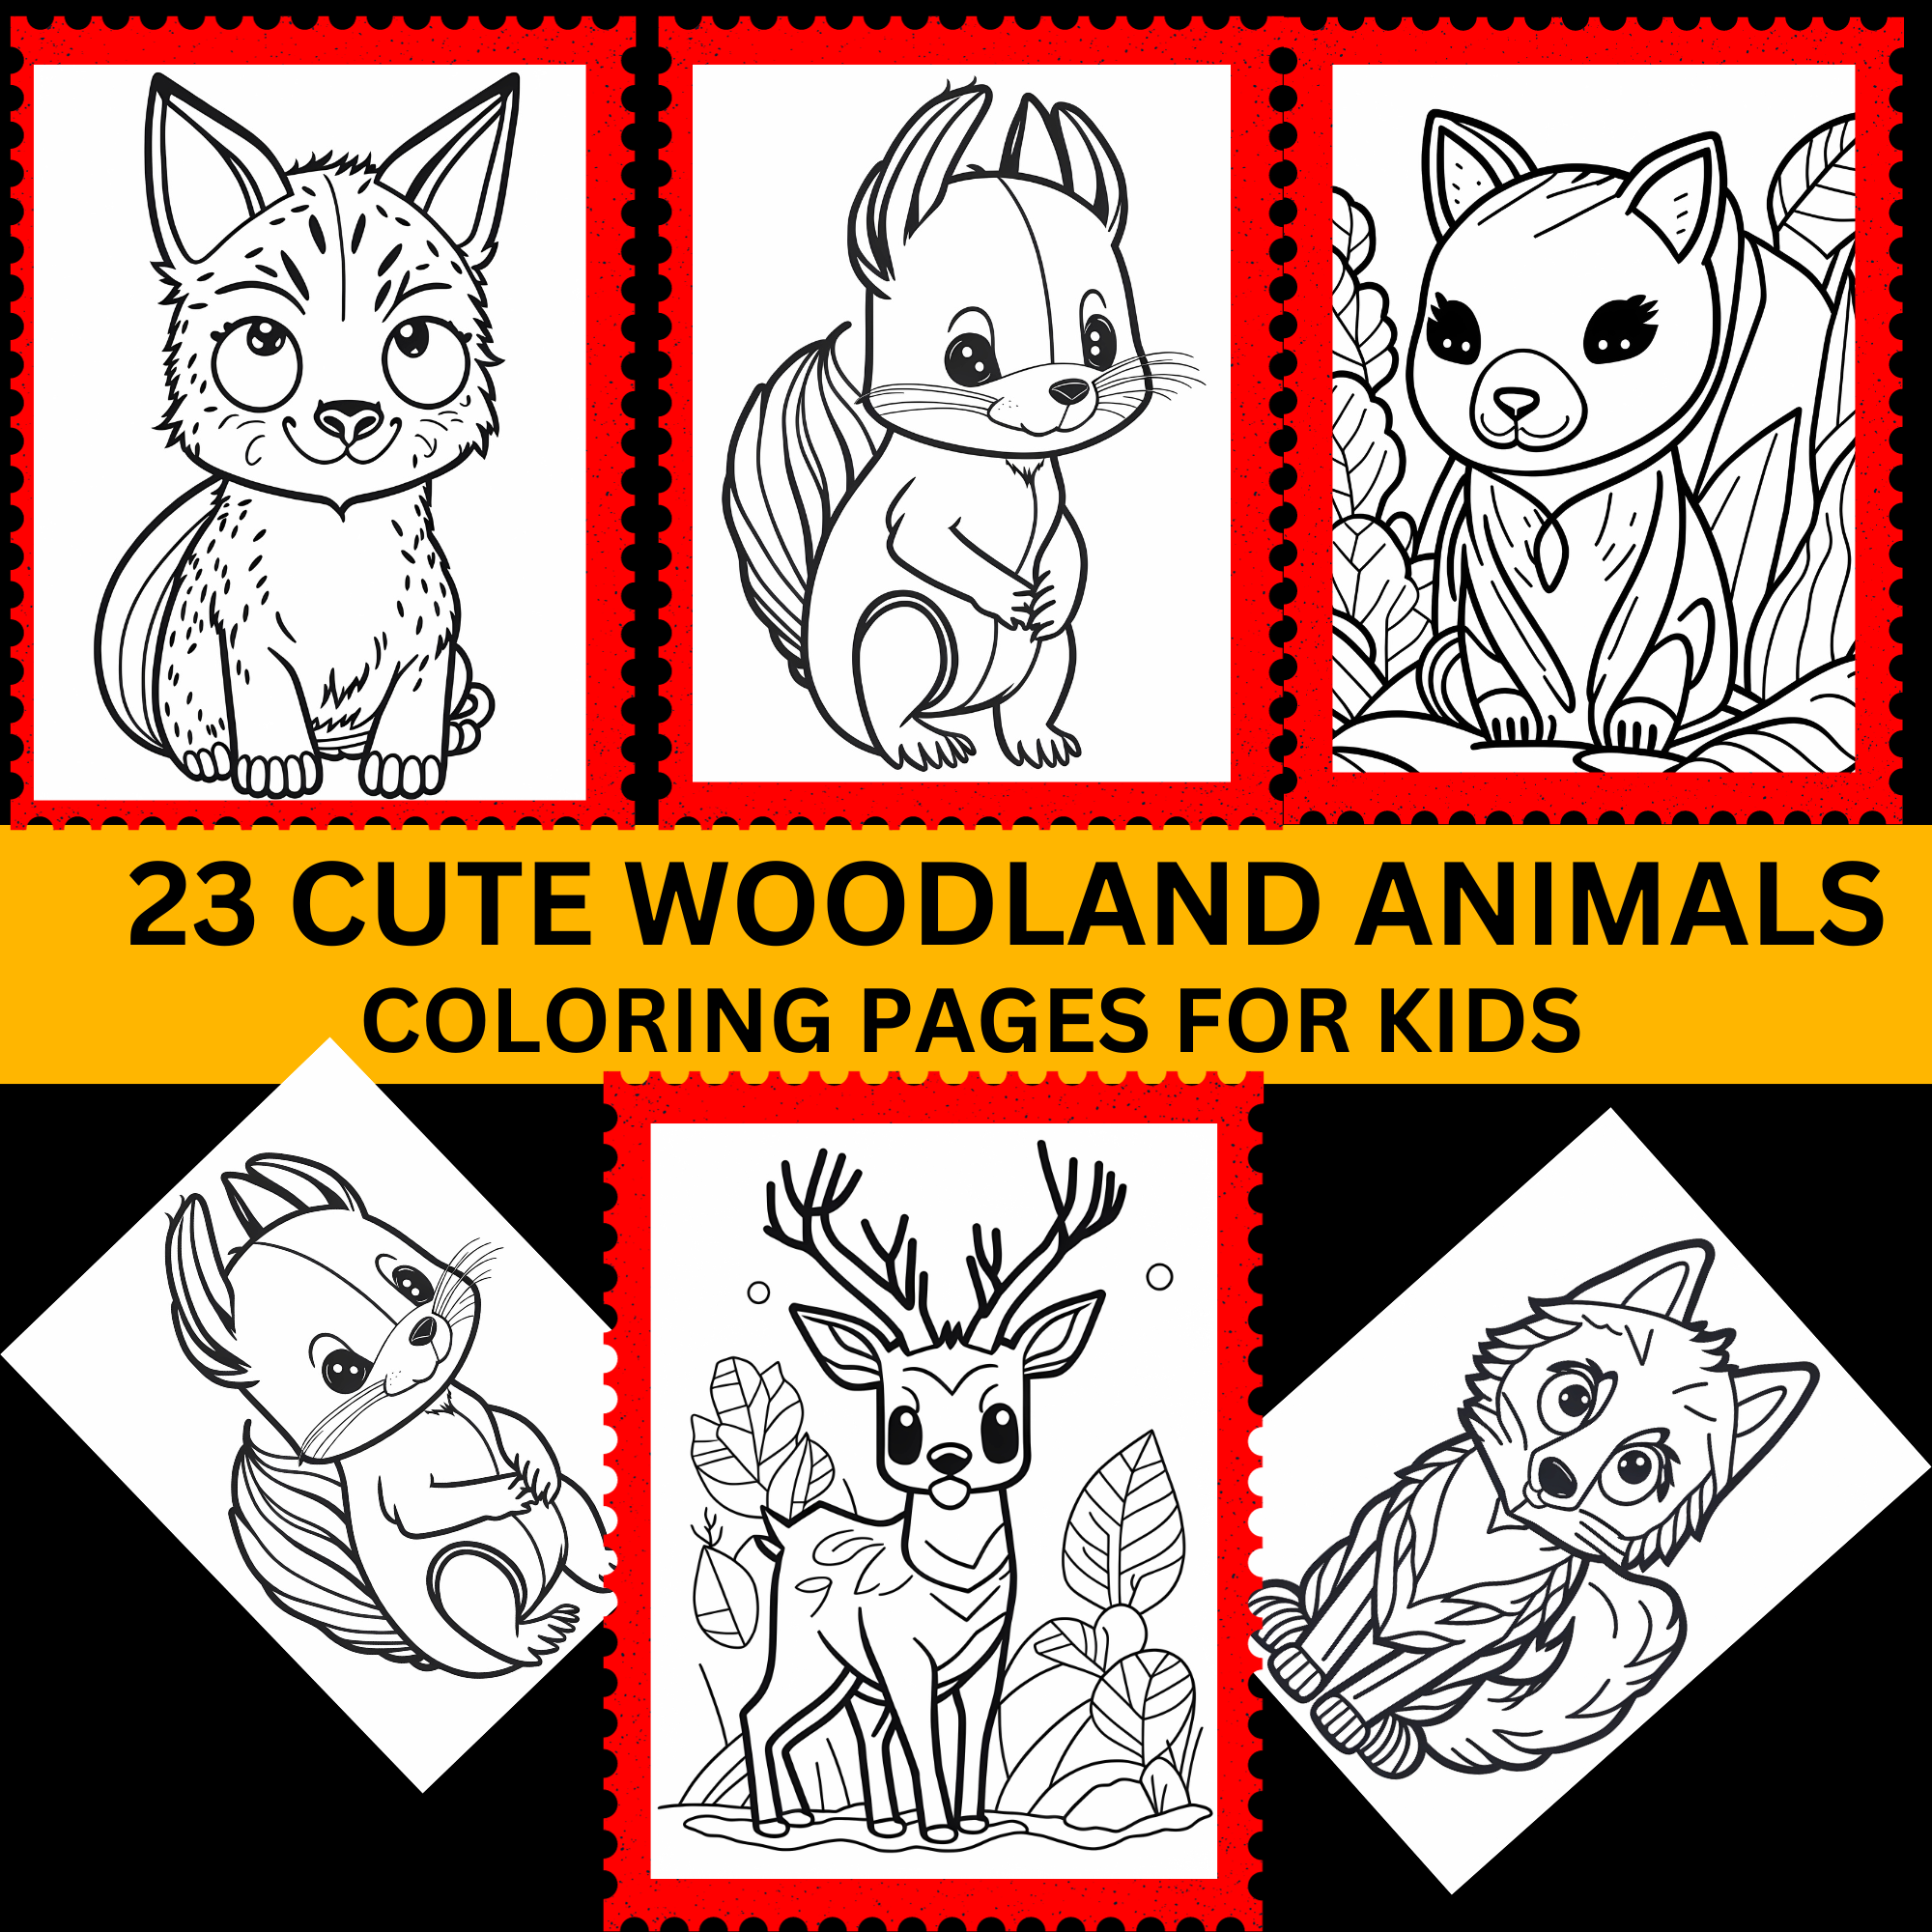 Unique and adorable woodland animals coloring pages for kids